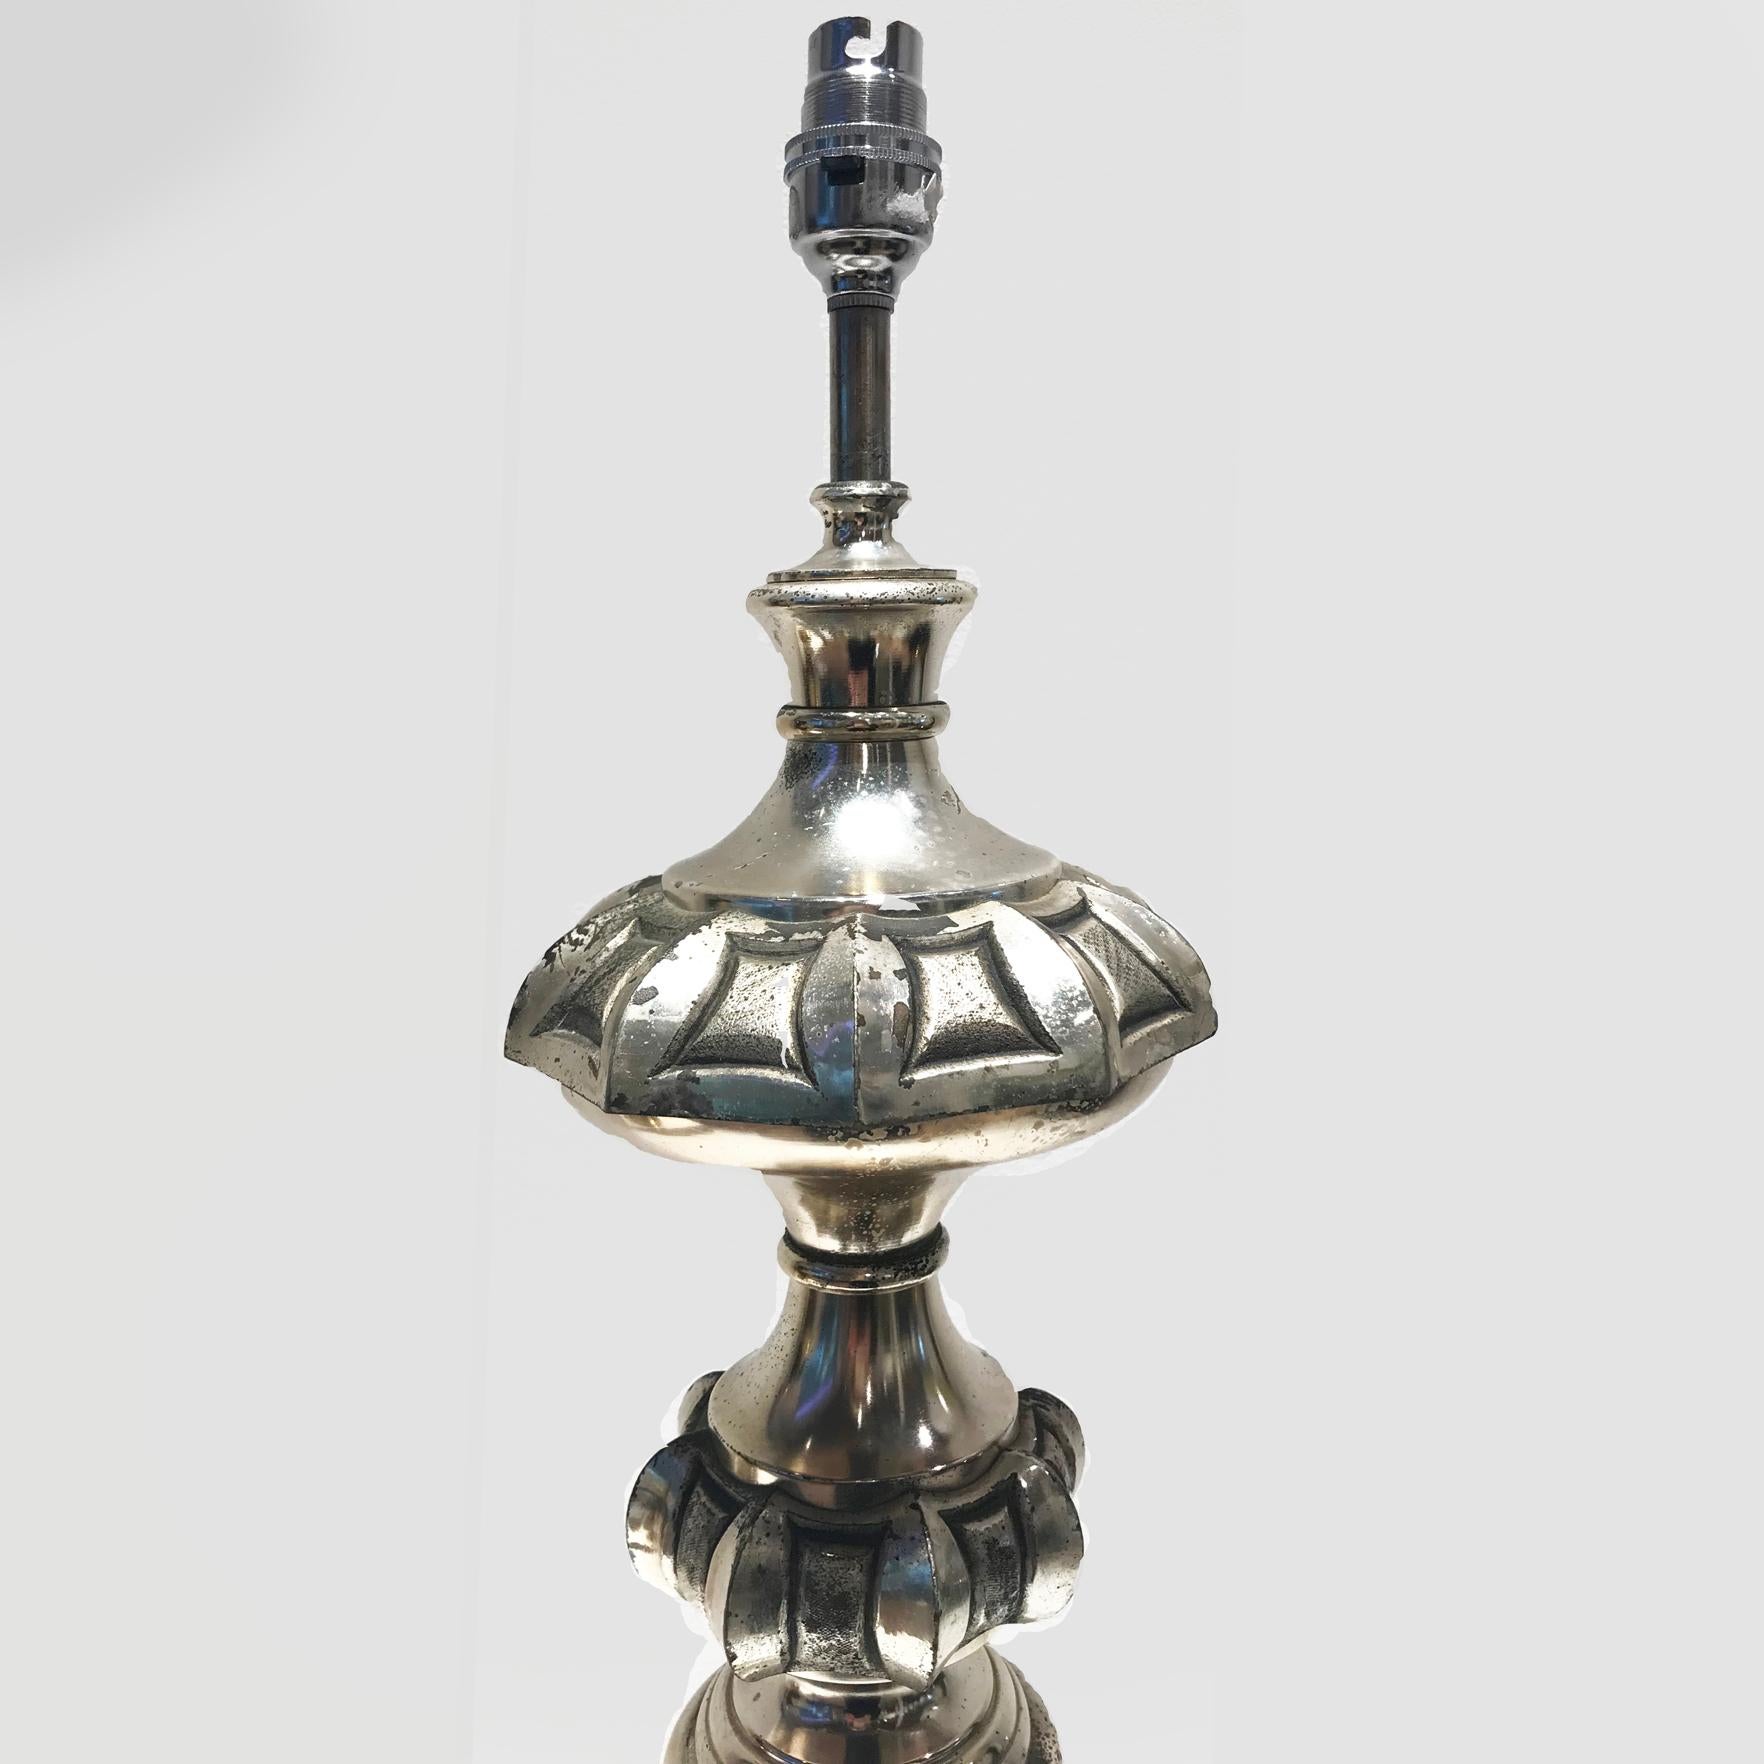 Pair of highly decorative silver plated French table lamps from mid-20th century. Both table lamps feature interesting surface qualities as the silver plate has naturally oxidised over time, creating a beautiful patina. Sold as a pair. Lampshade is